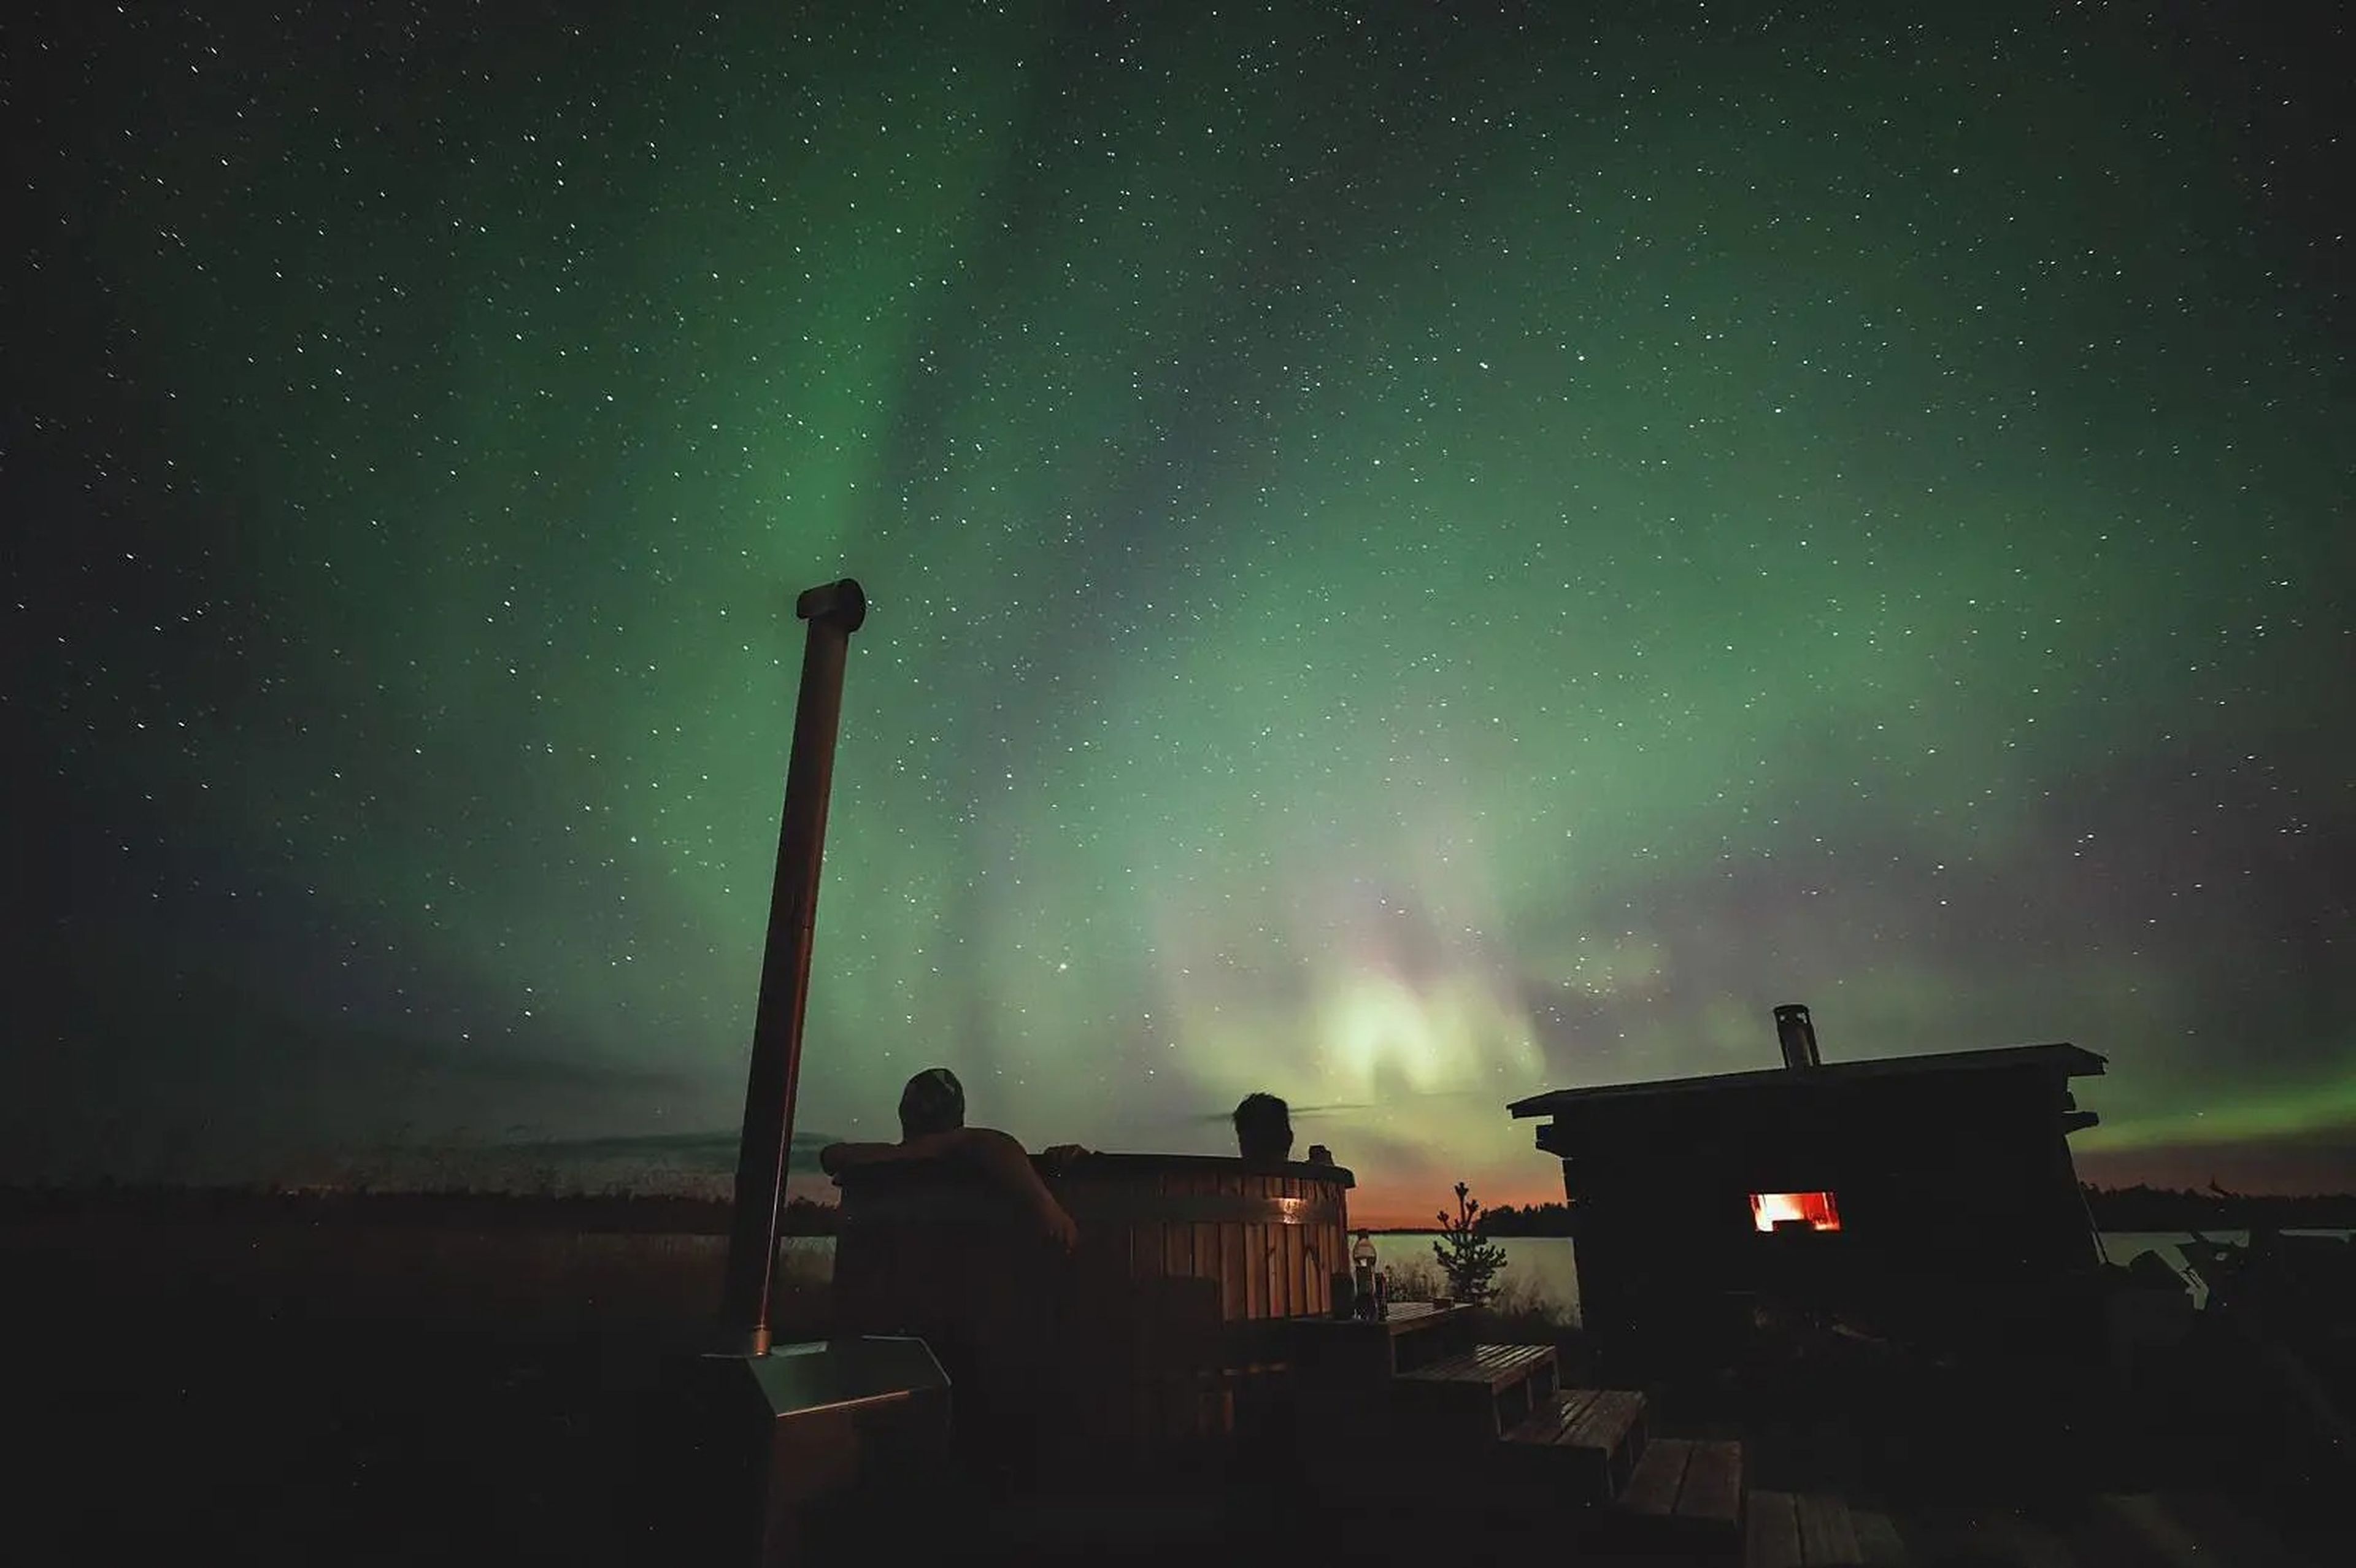 Petri Kokkonen's cabin in the Finnish wilderness during the Northern lights.